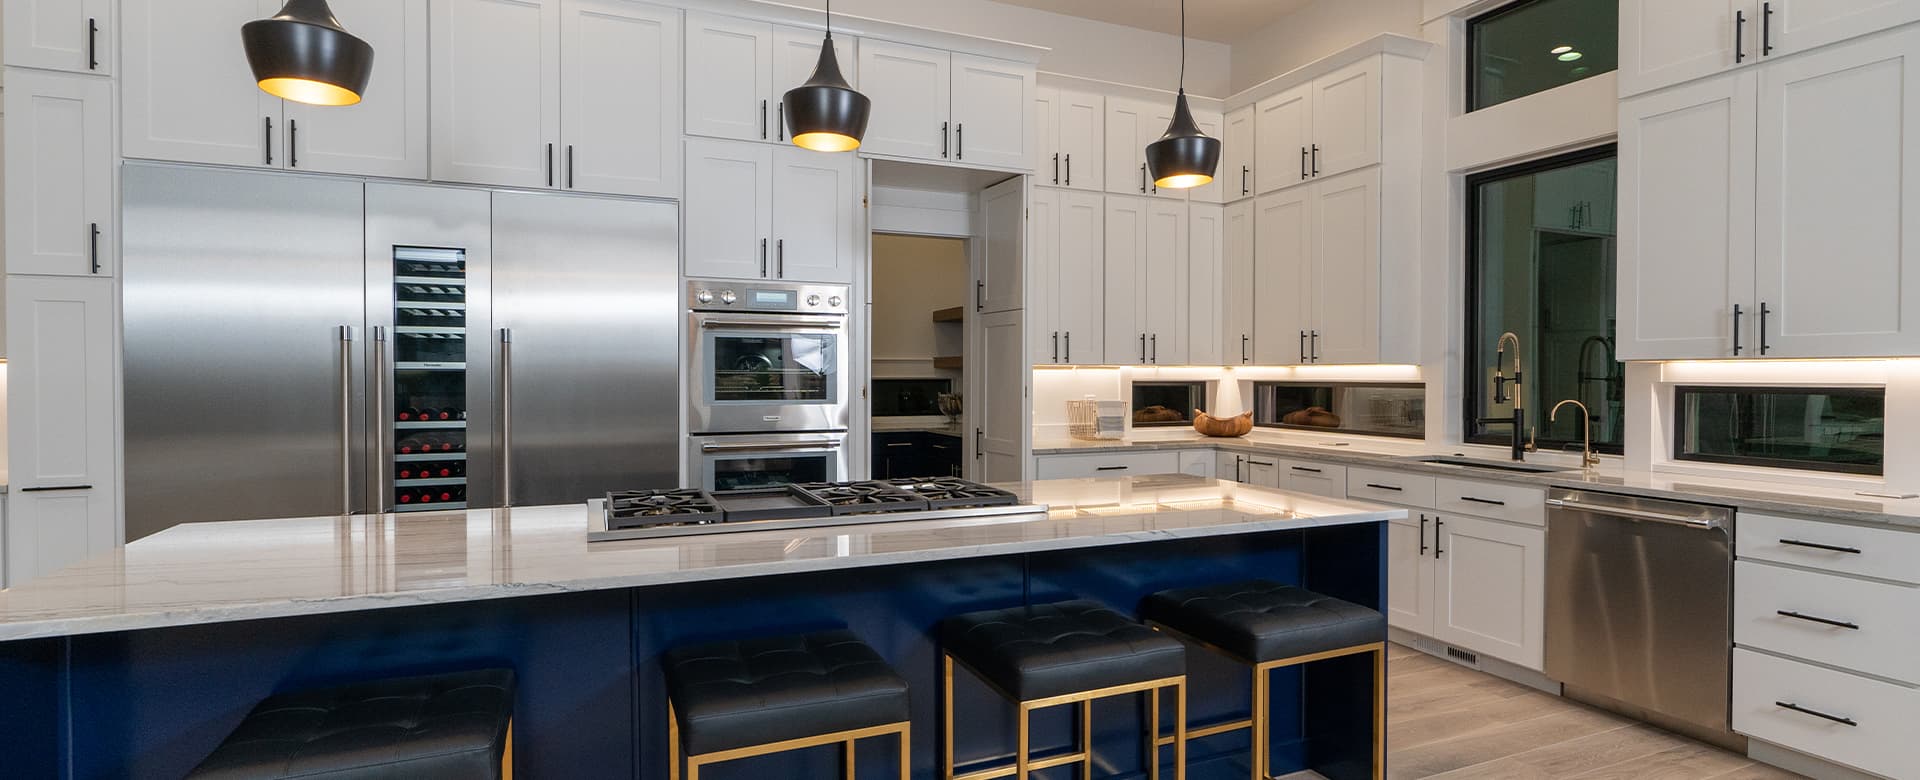 high quality cabinets in Utah kitchen